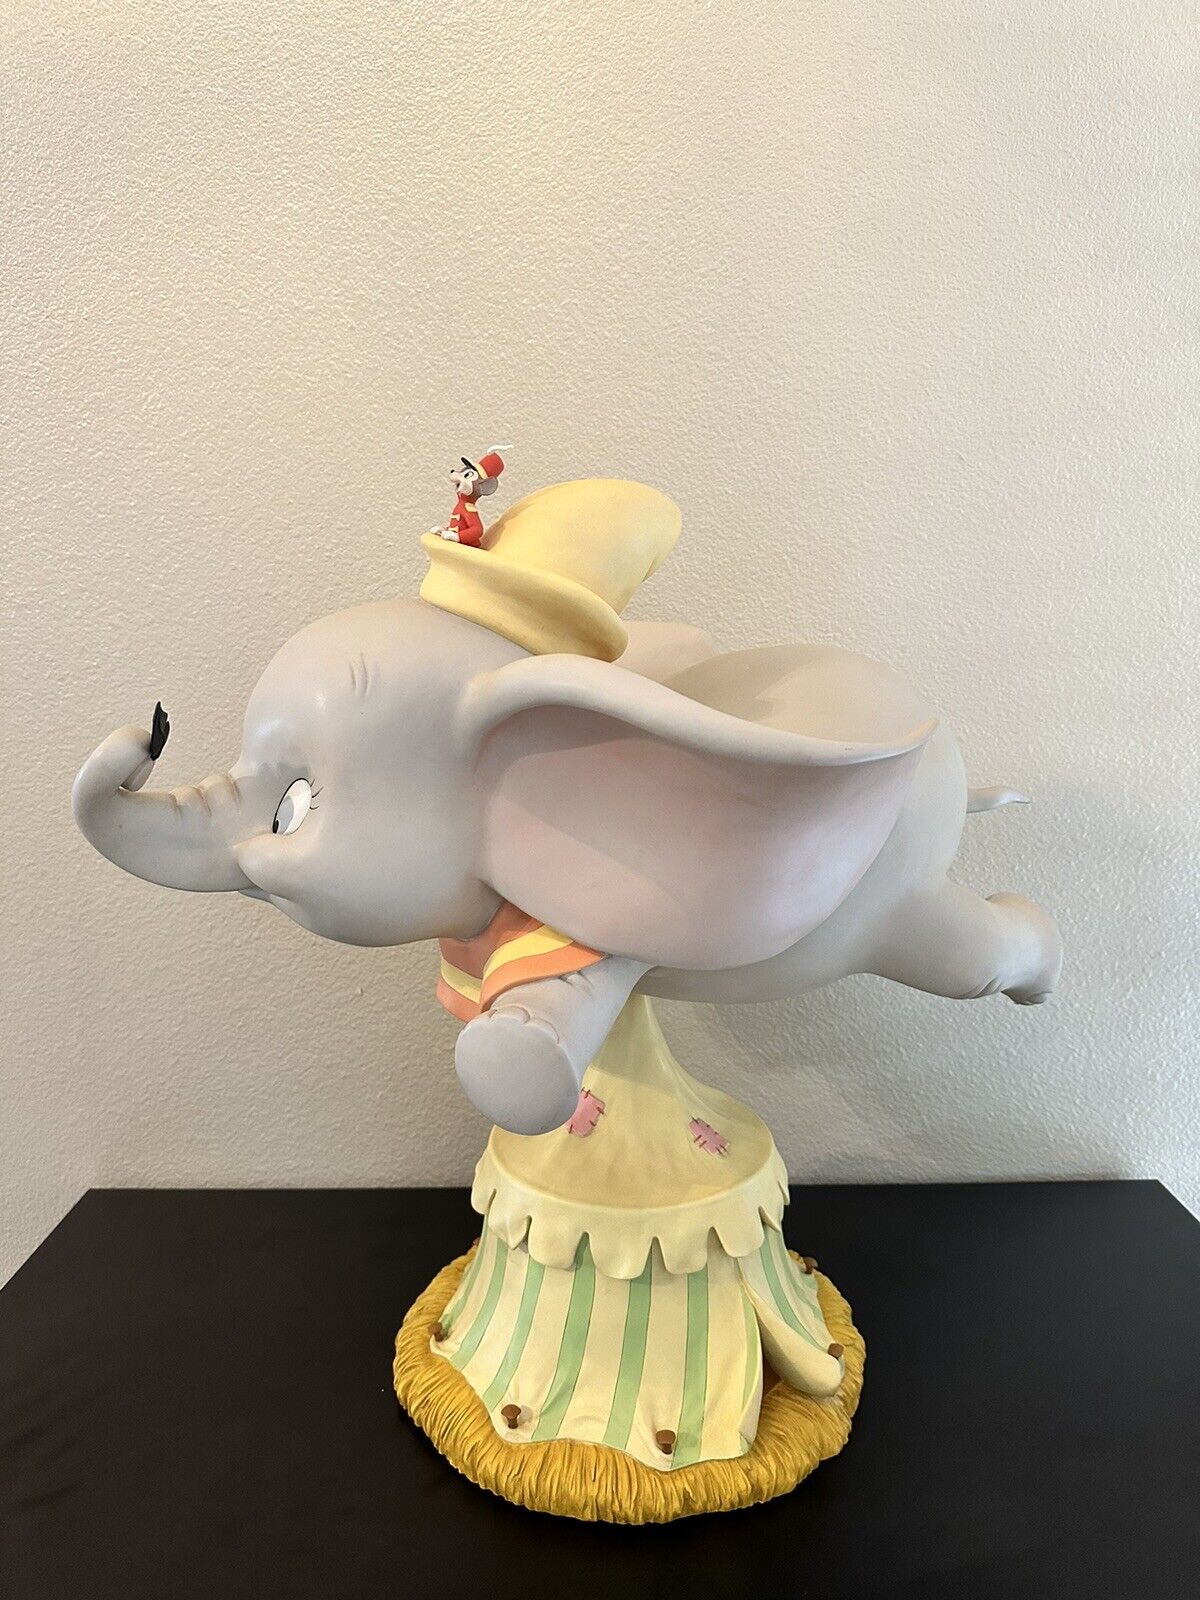 DISNEY AUCTIONS FLYING CIRCUS DUMBO & TIMOTHY BIG FIG SCULPTURE RARE LE 250